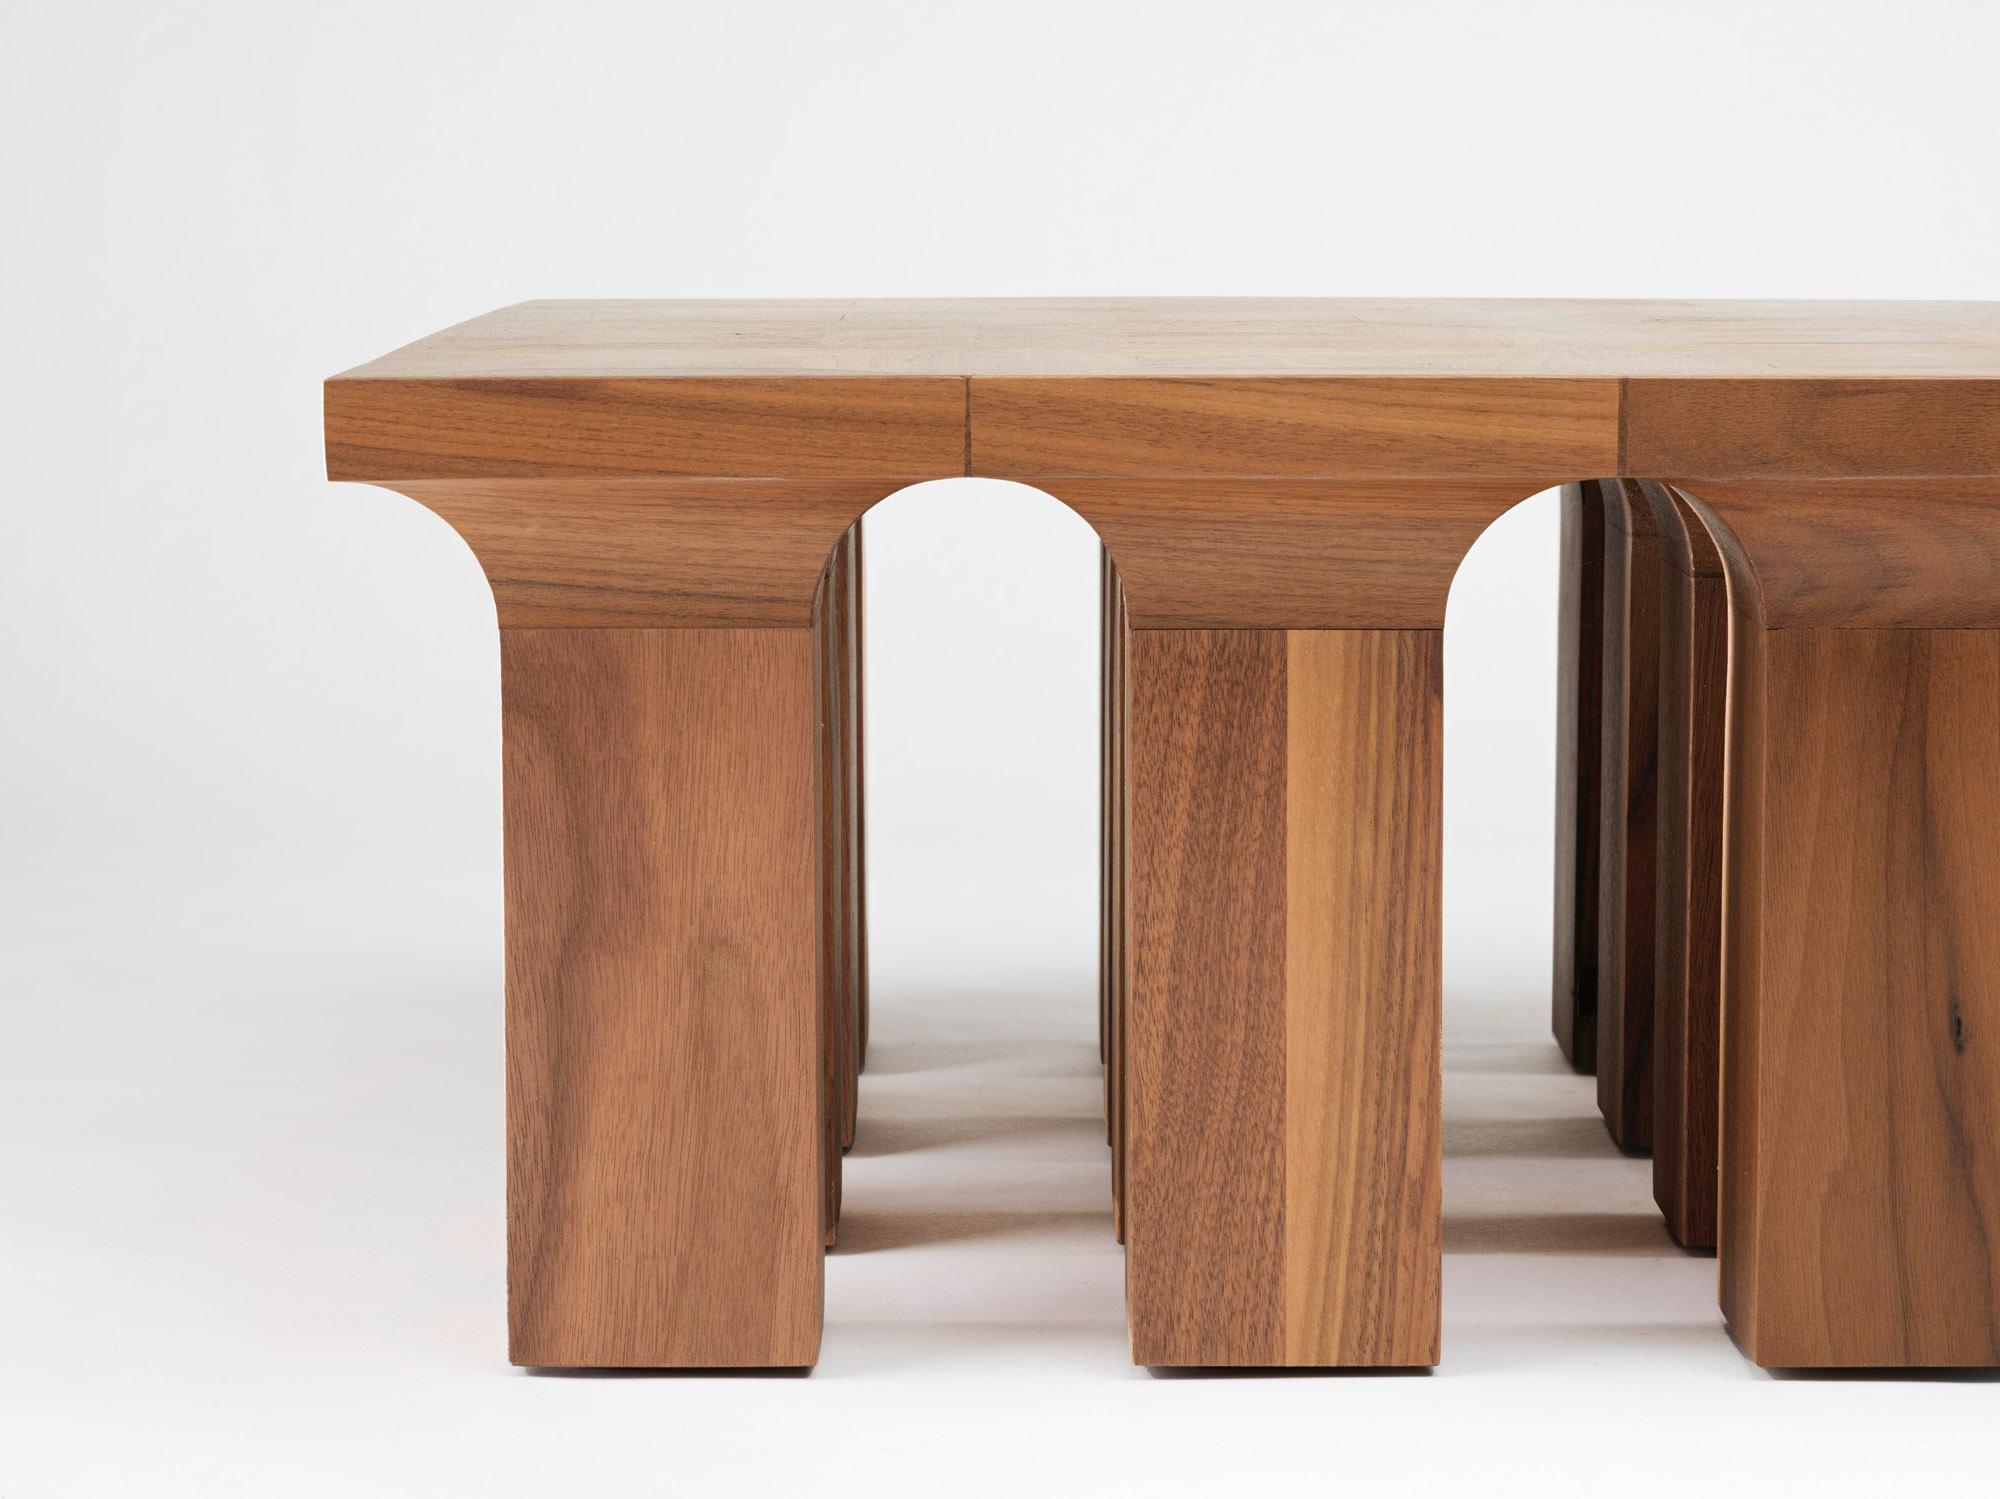 Hand-Crafted Contemporary Solid American Walnut Arcus Coffee Table Big by Tim Vranken For Sale